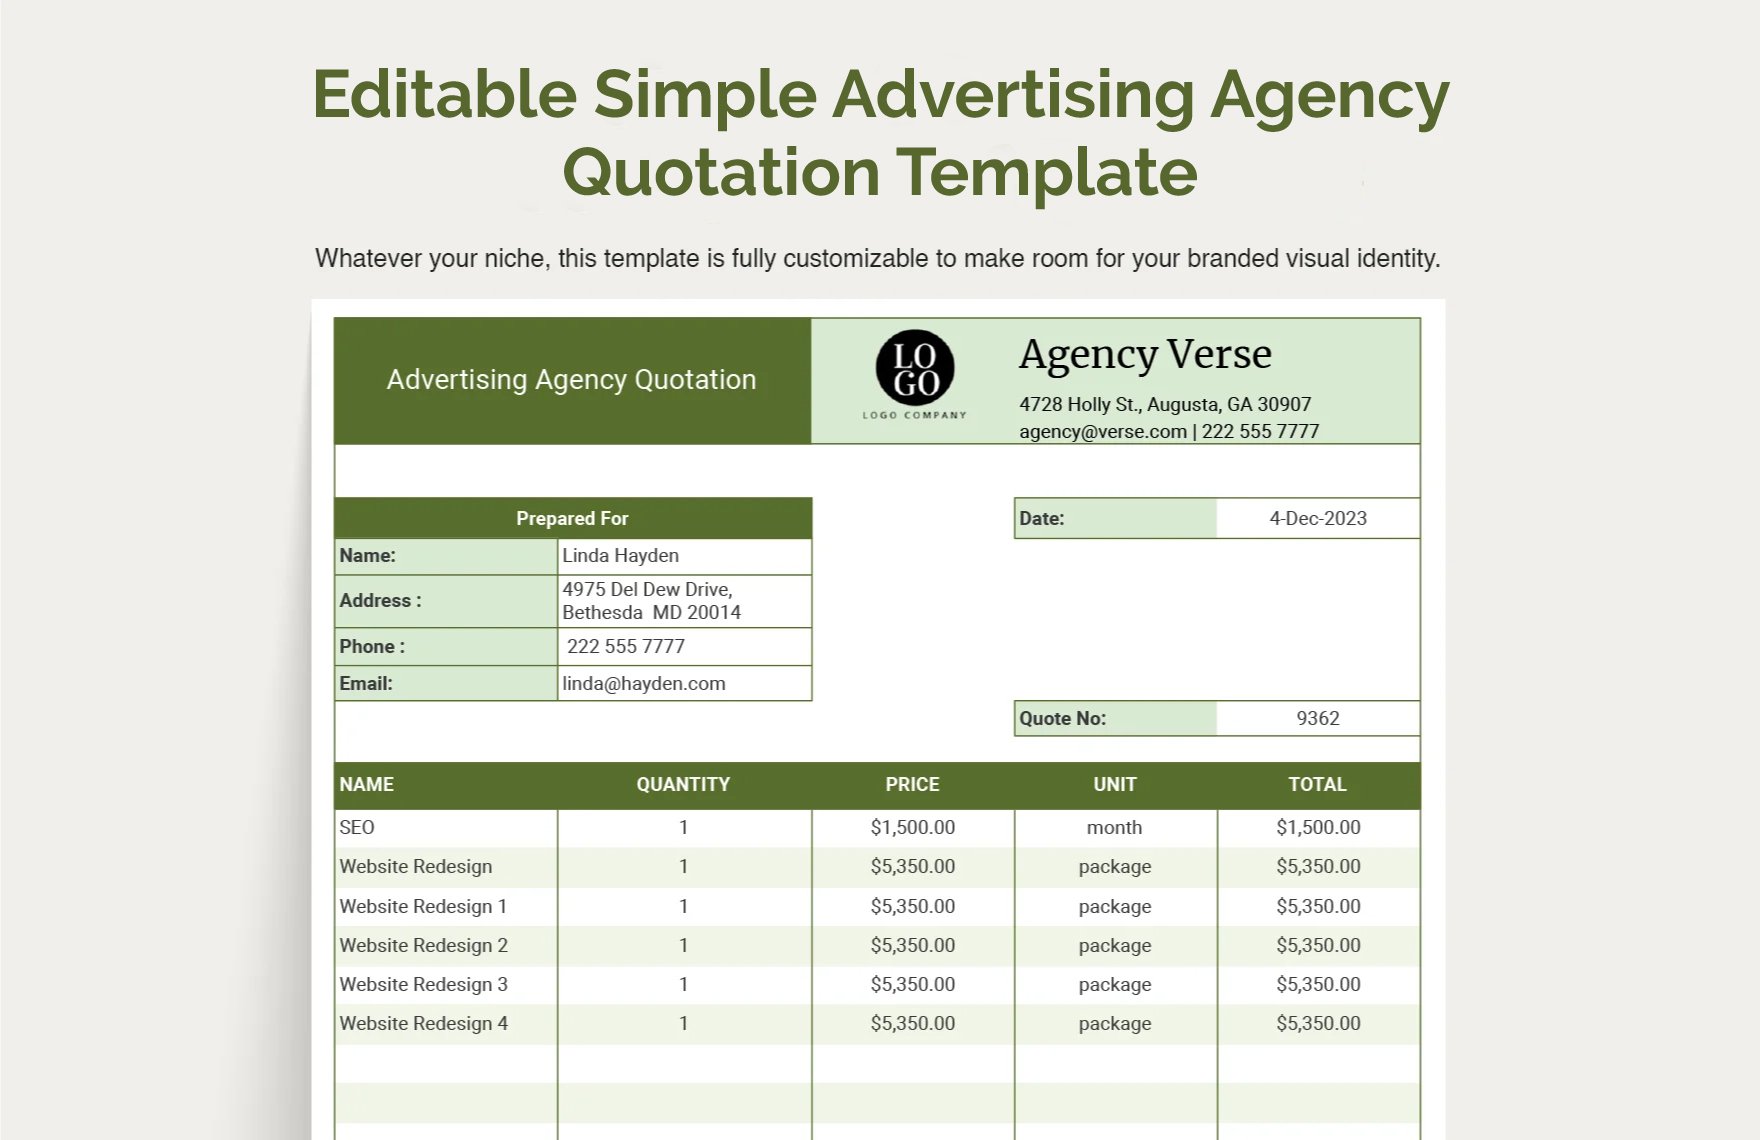 Editable Simple Advertising Agency Quotation Template